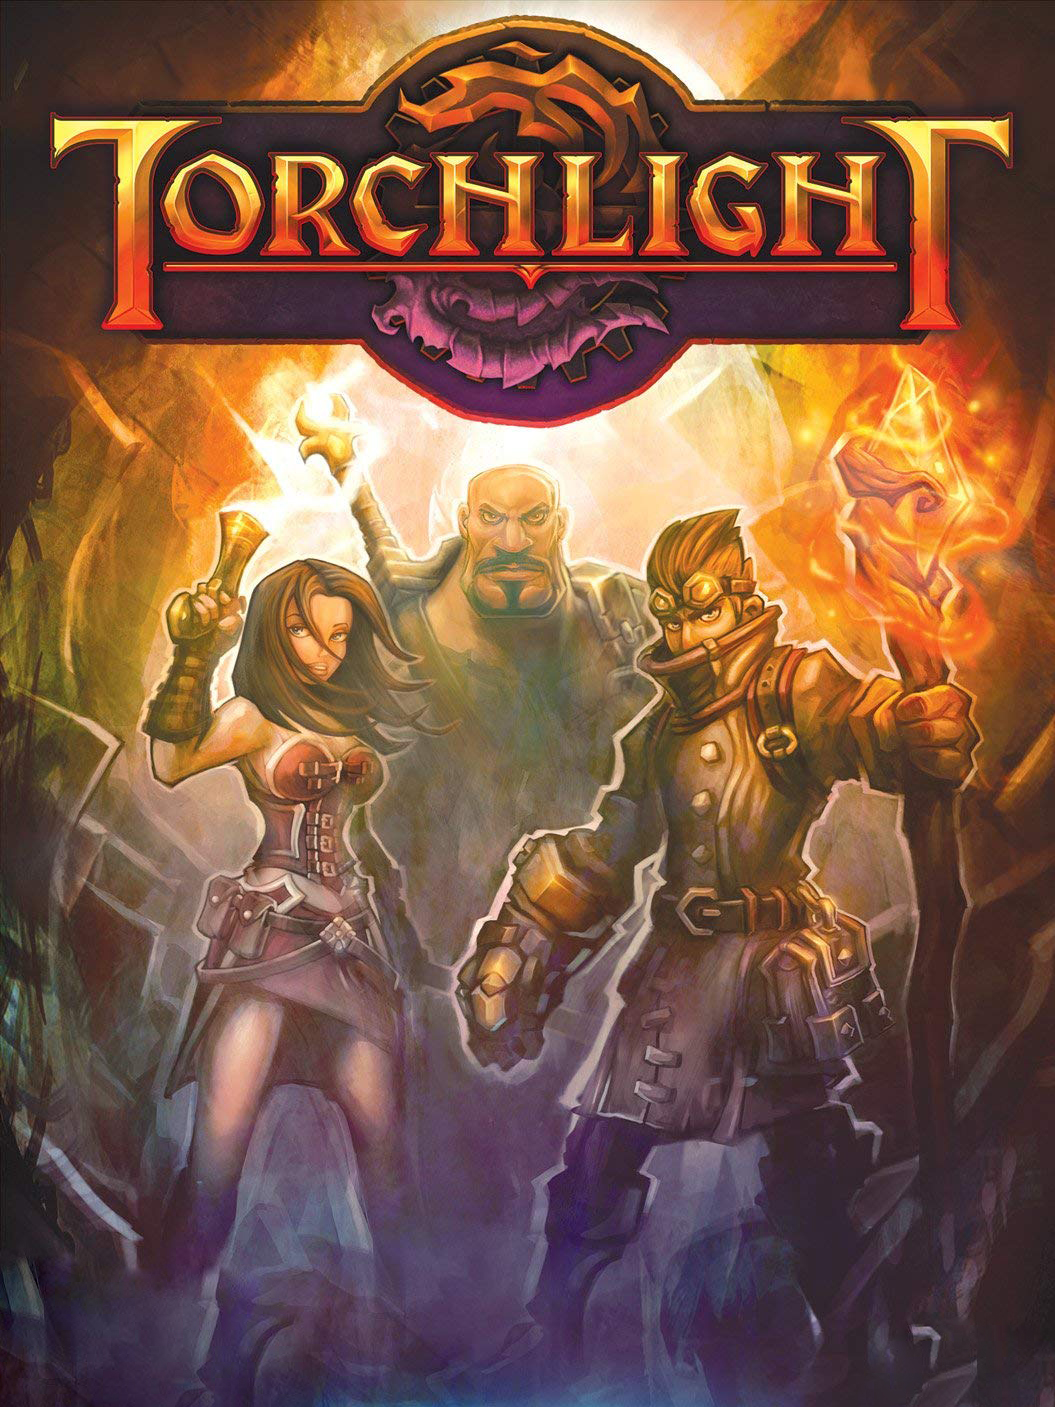 Steam player count for Torchlight 2 - Torchlight II - Giant Bomb